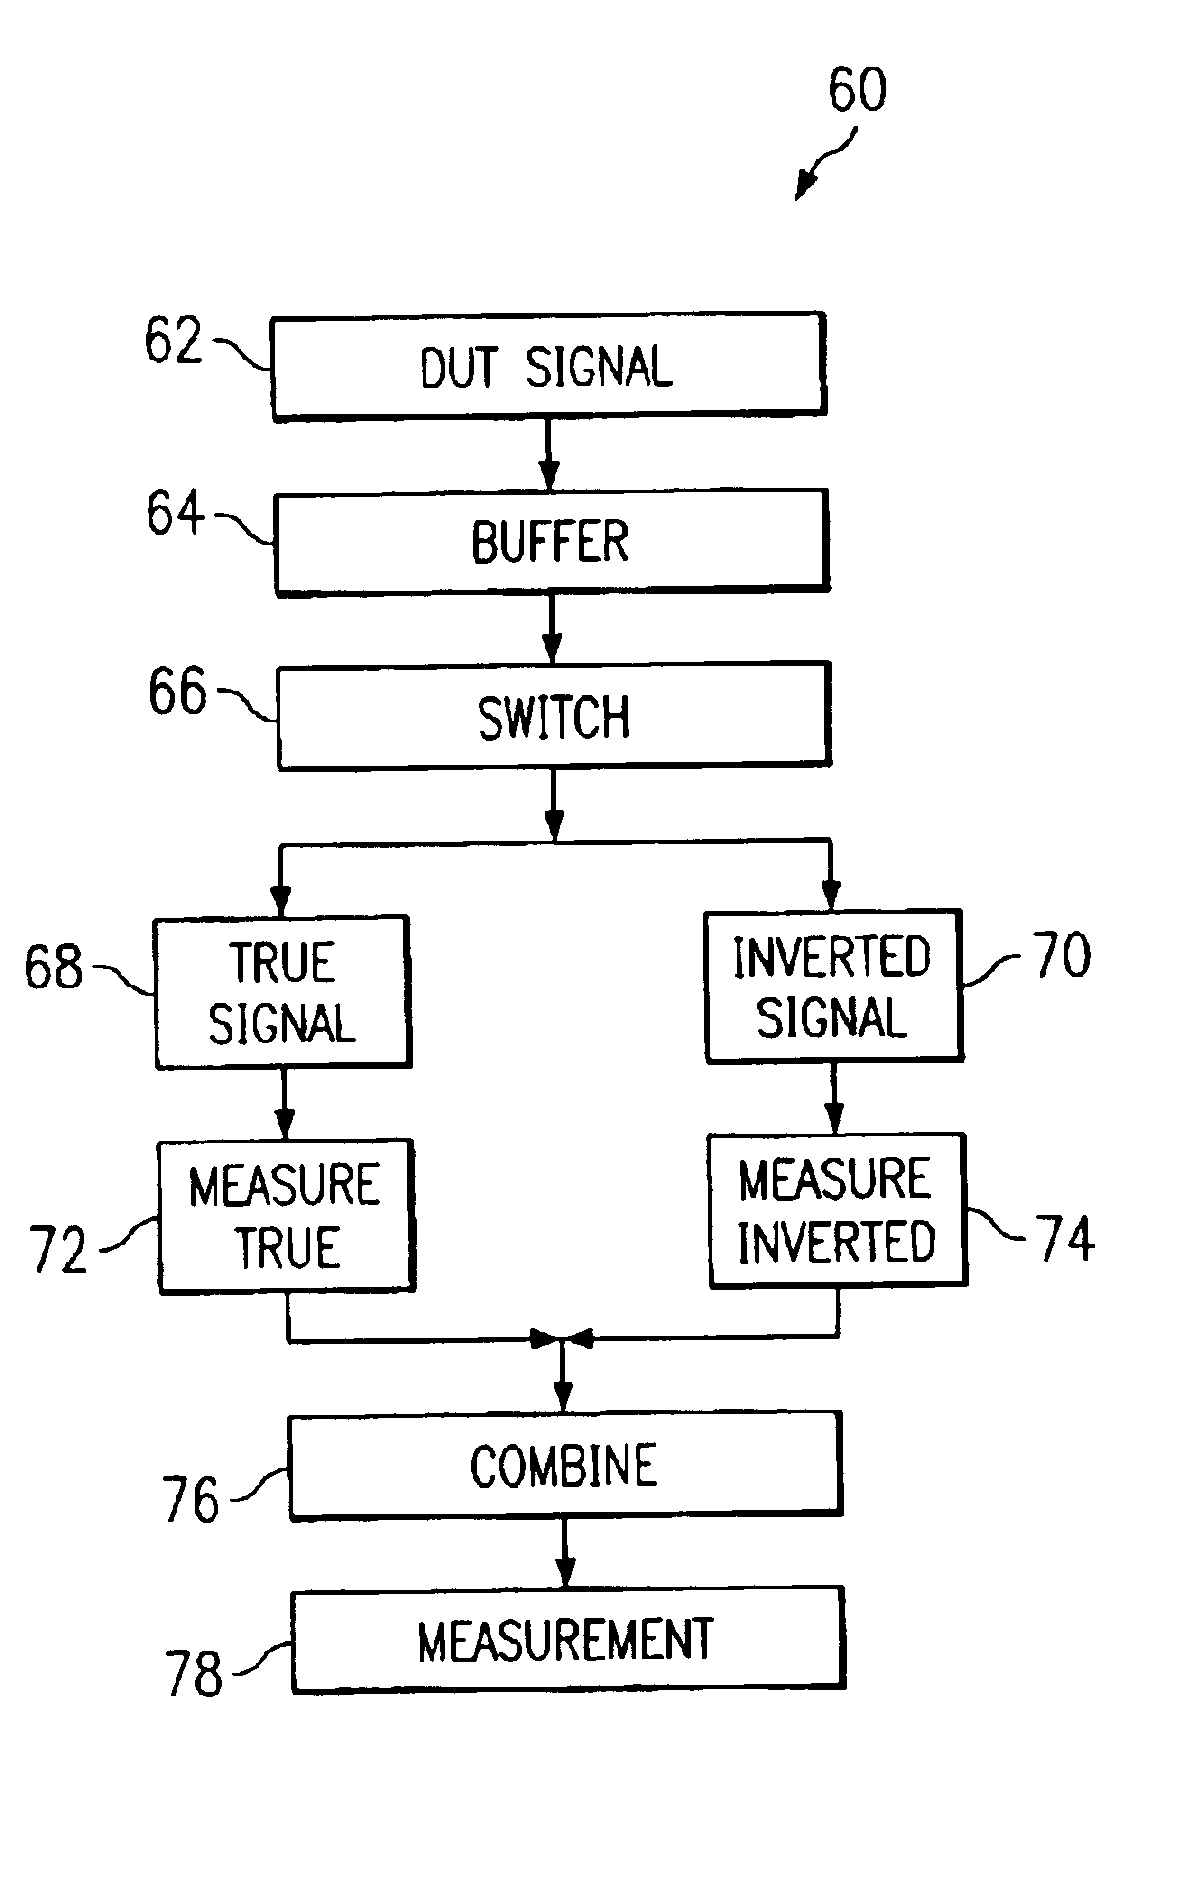 Accurate time measurement system circuit and method